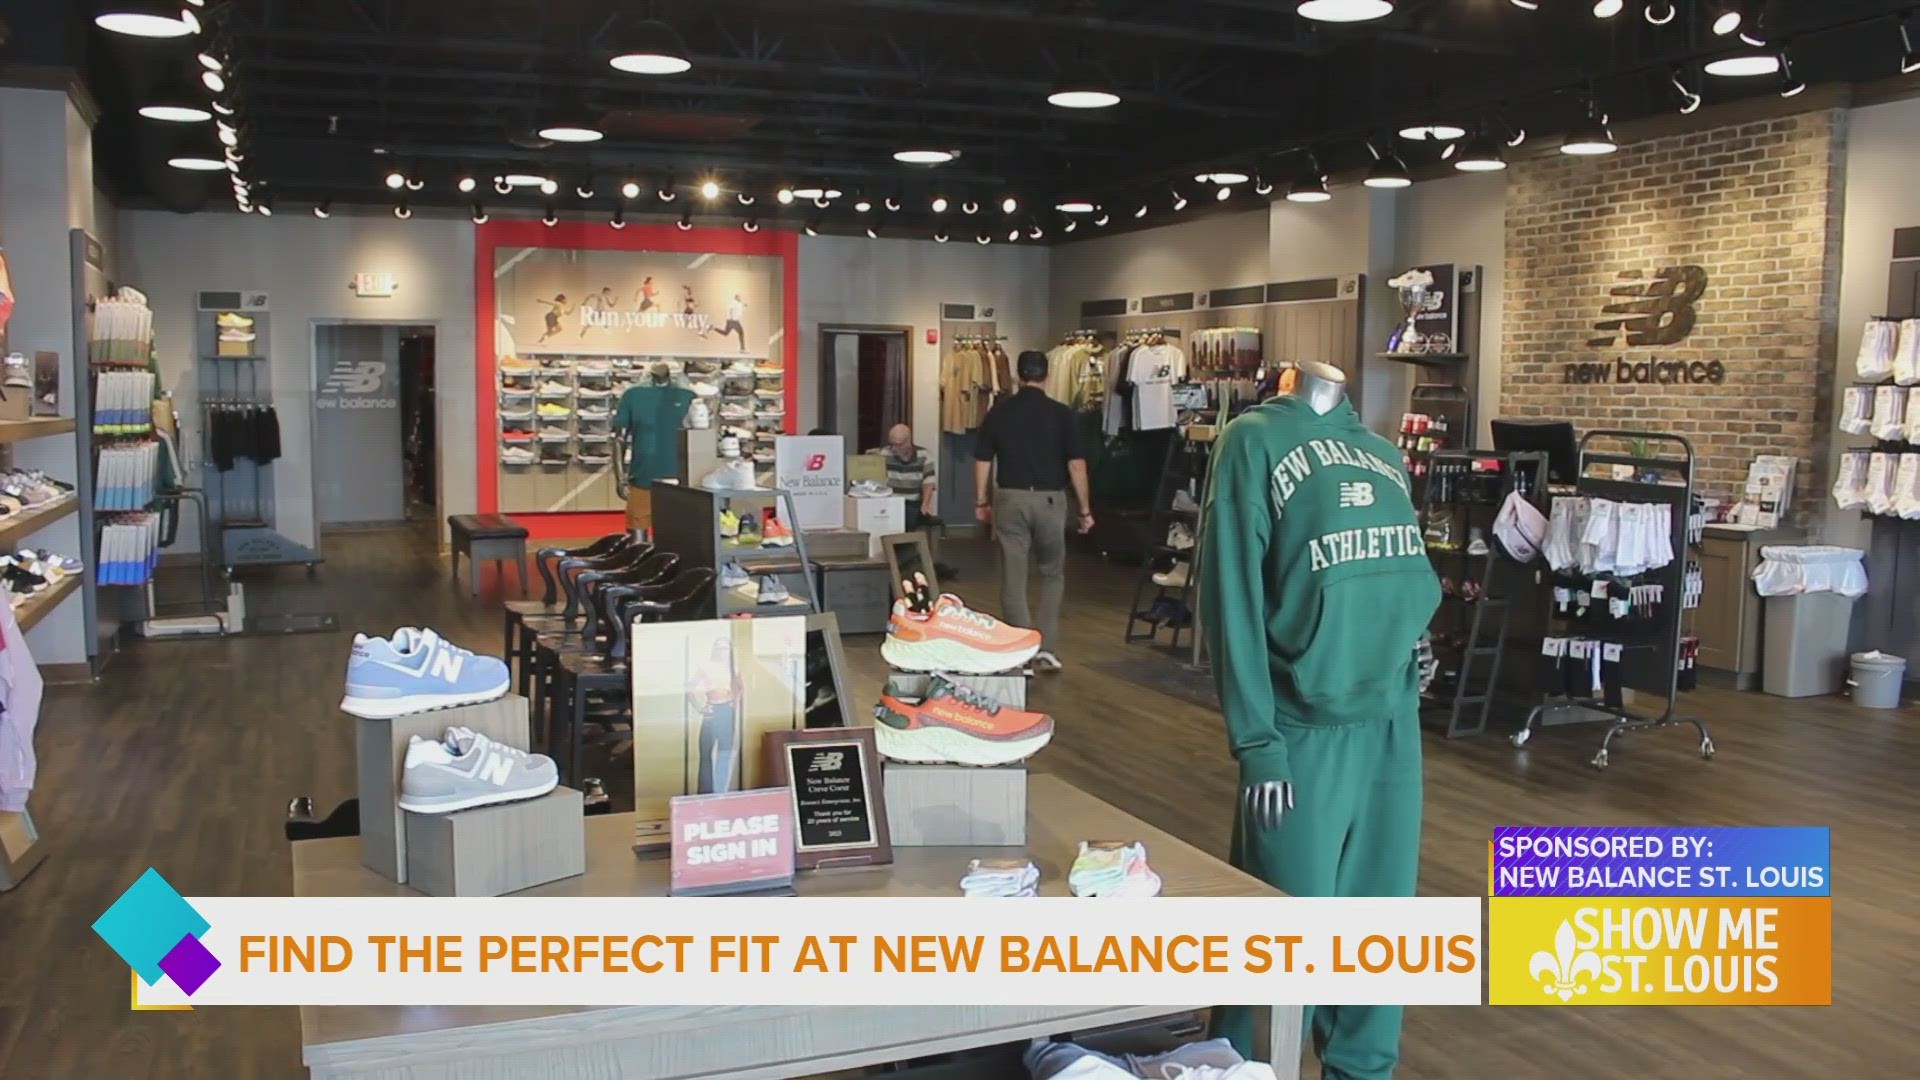 The nationally known, locally owned shoe store offers the region the largest selection of New Balance Shoes.